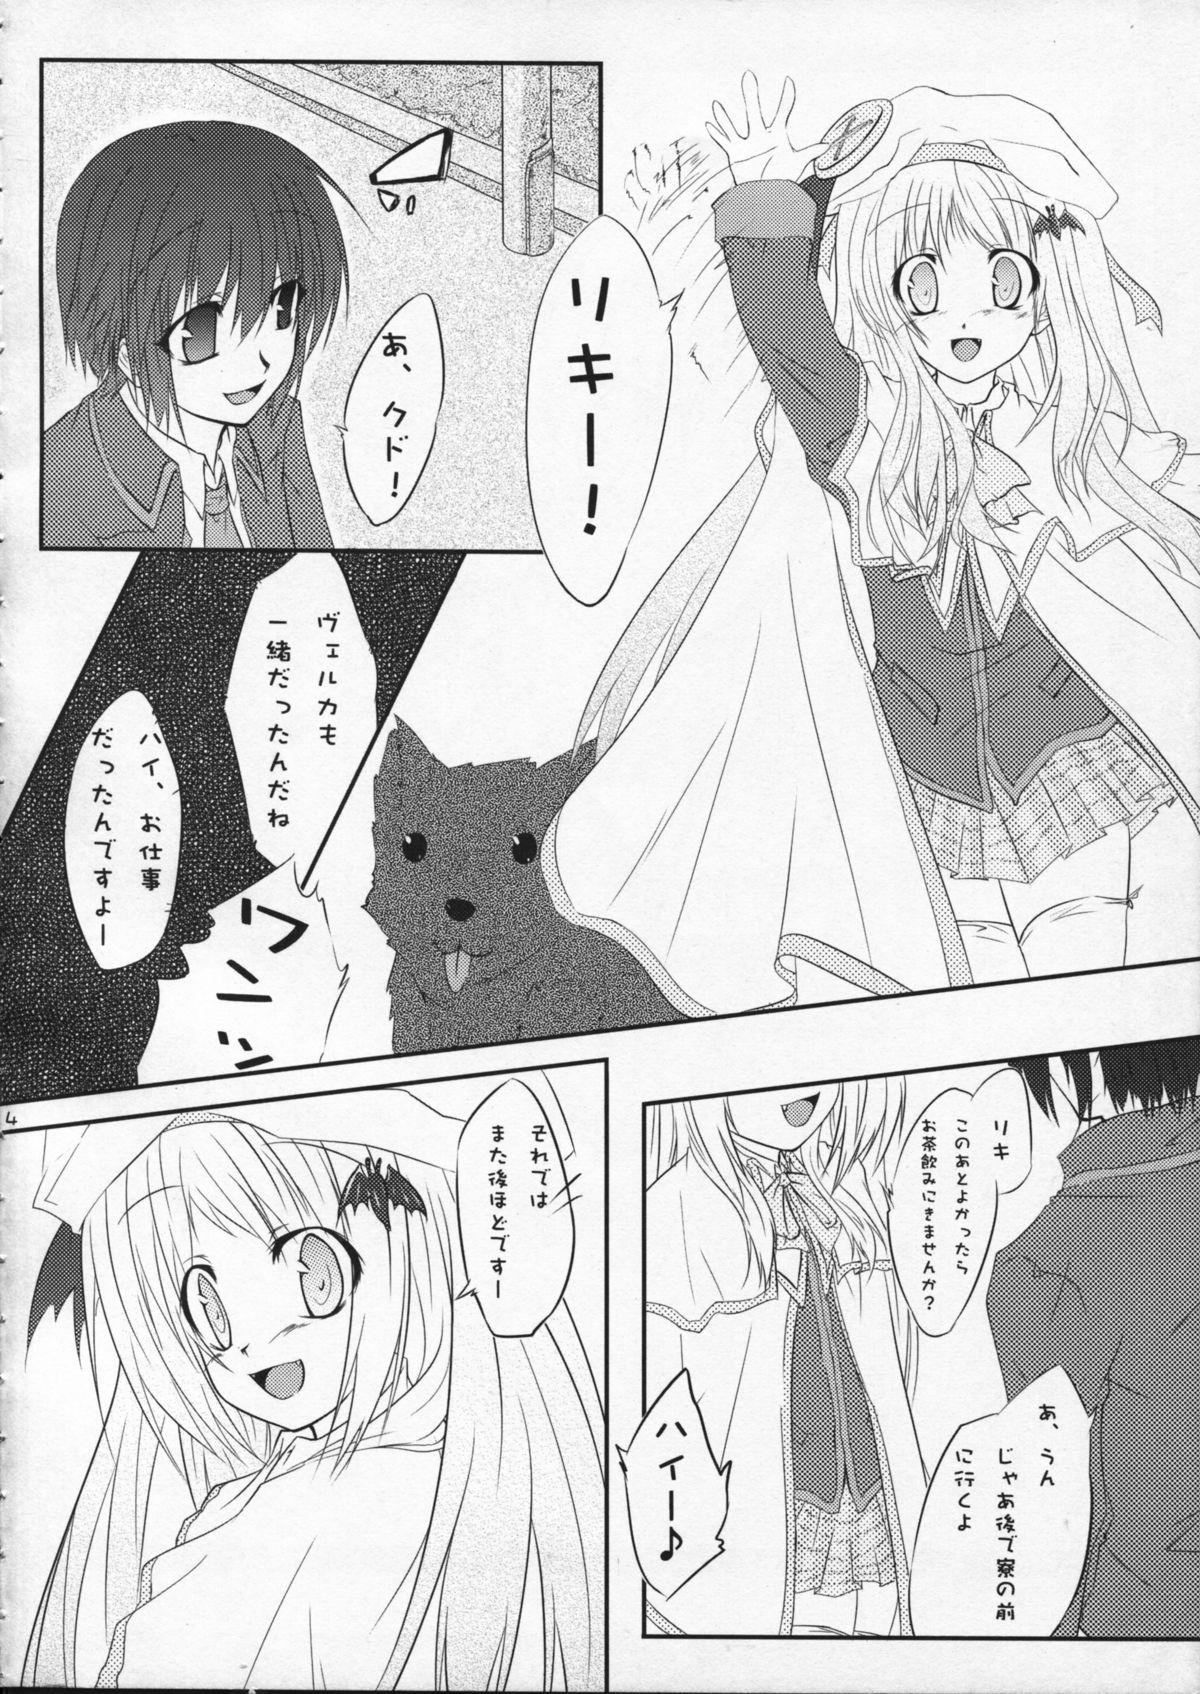 Fishnets Wanko no Jikan - Little busters Gay Dudes - Page 4